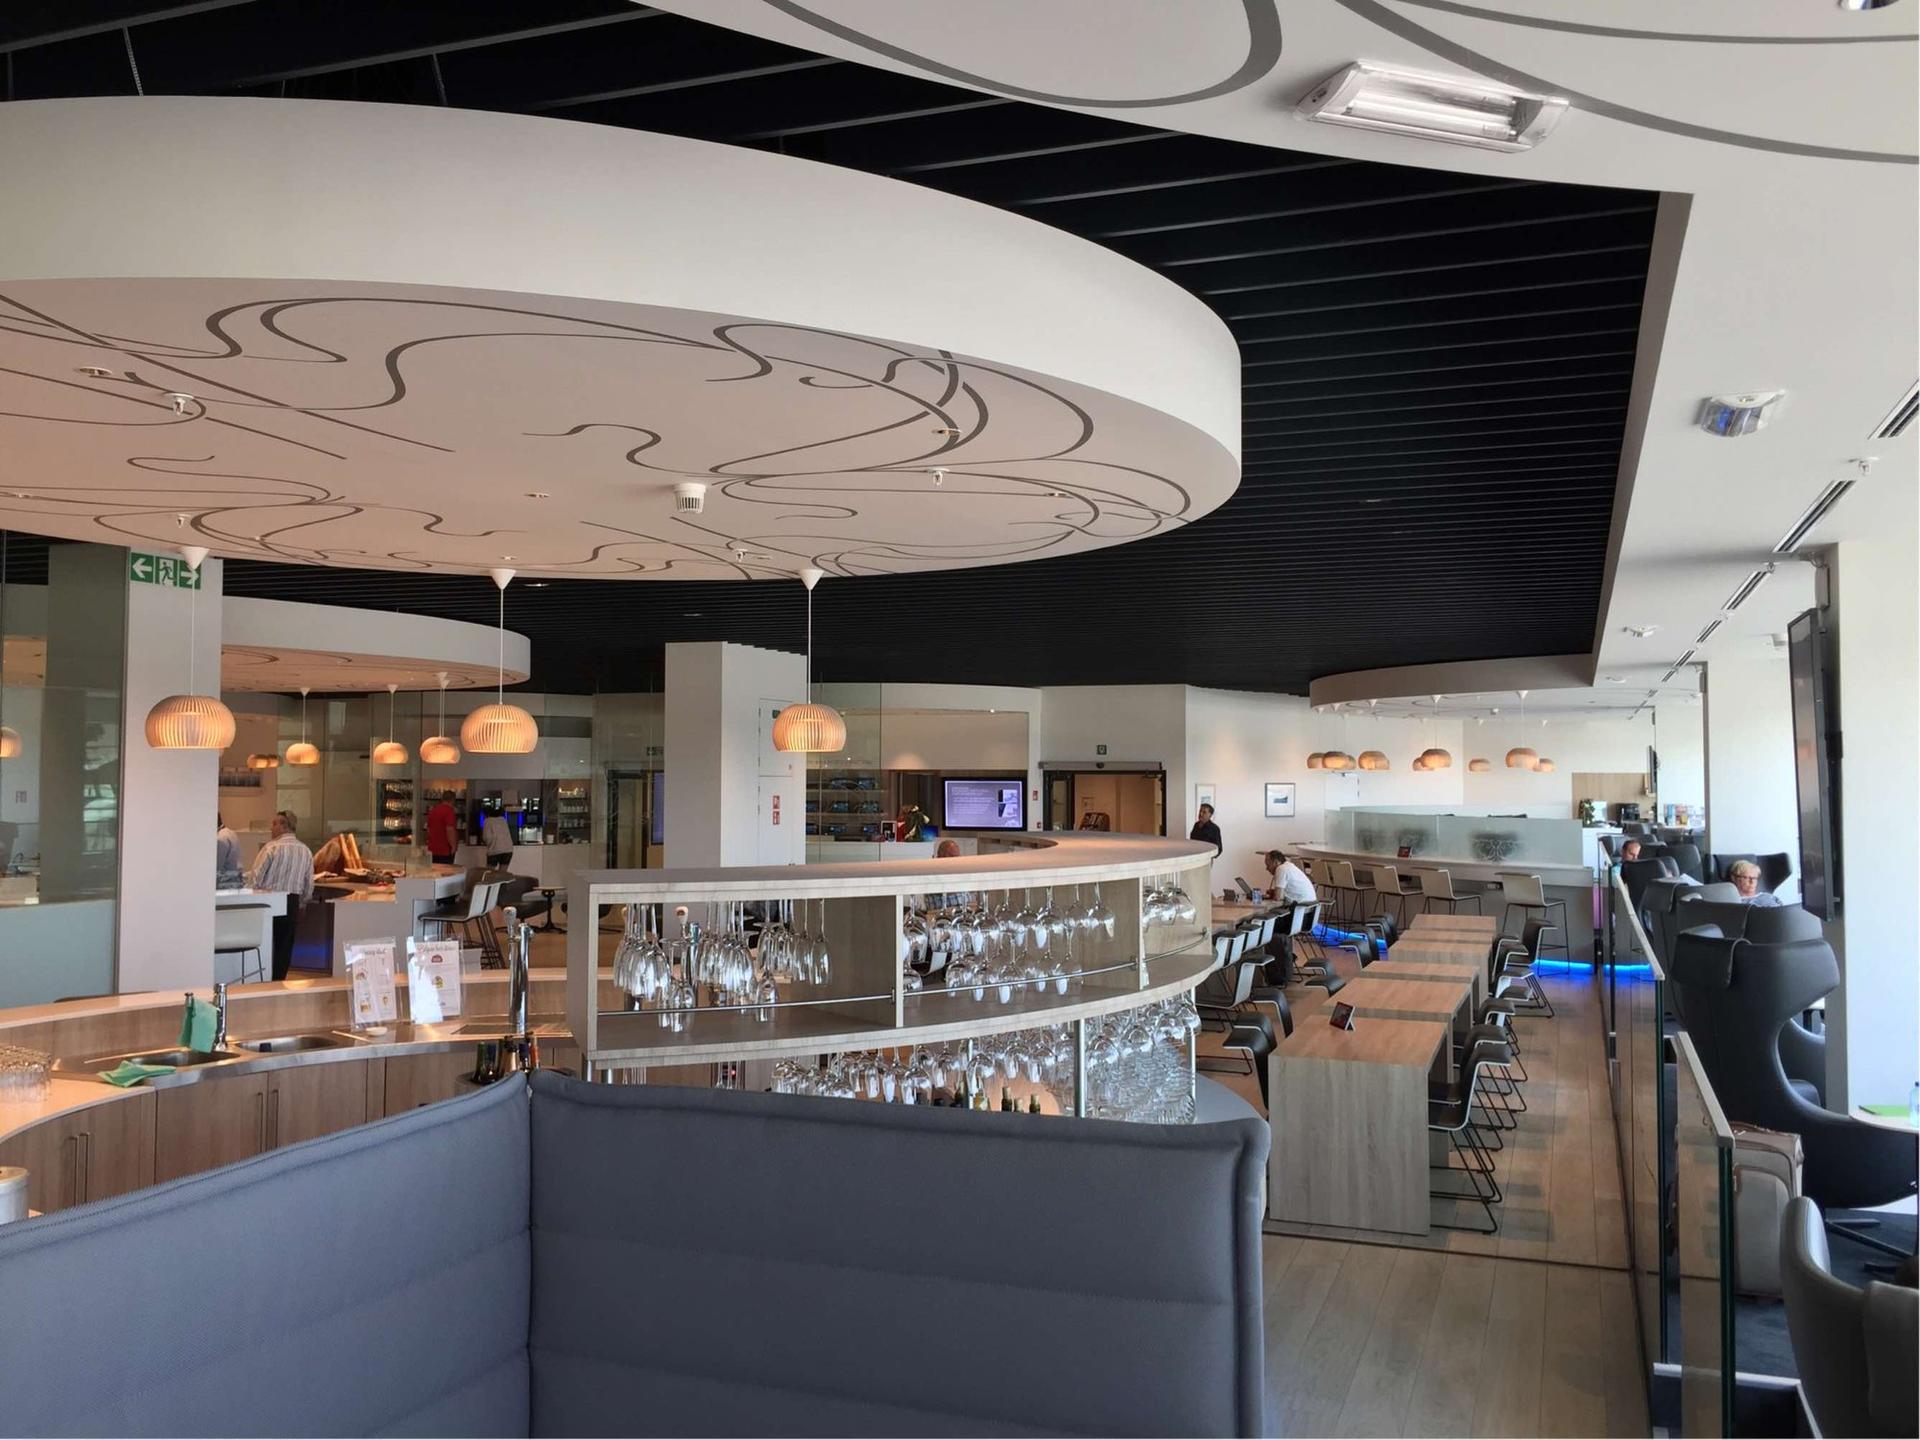 The Loft by Brussels Airlines and Lounge by Lexus image 6 of 23